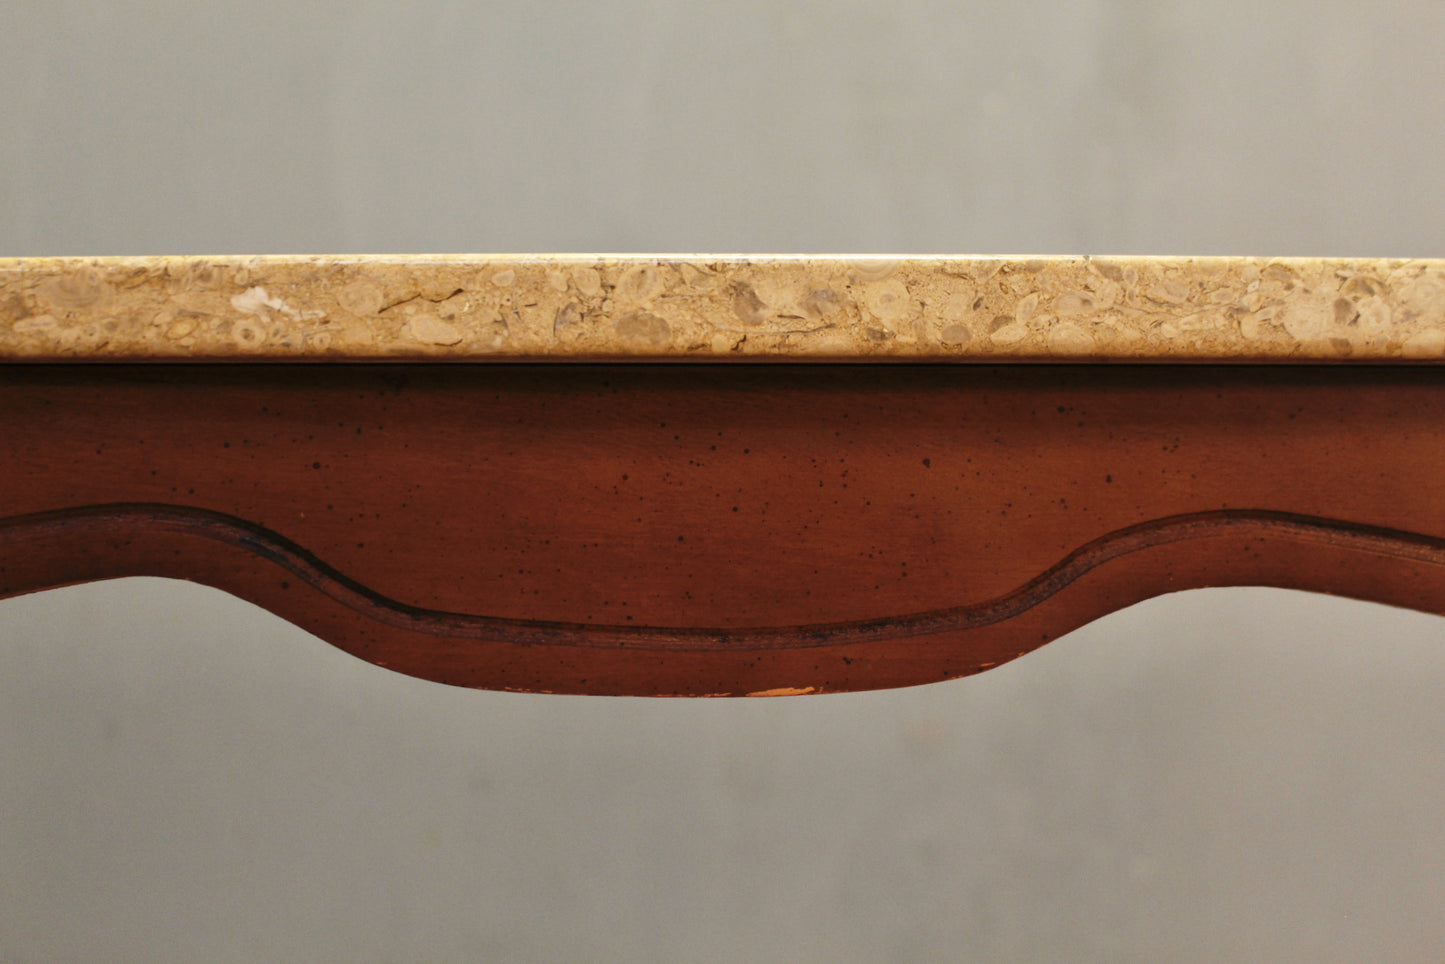 Slim Scalloped Marble-Top Console Table